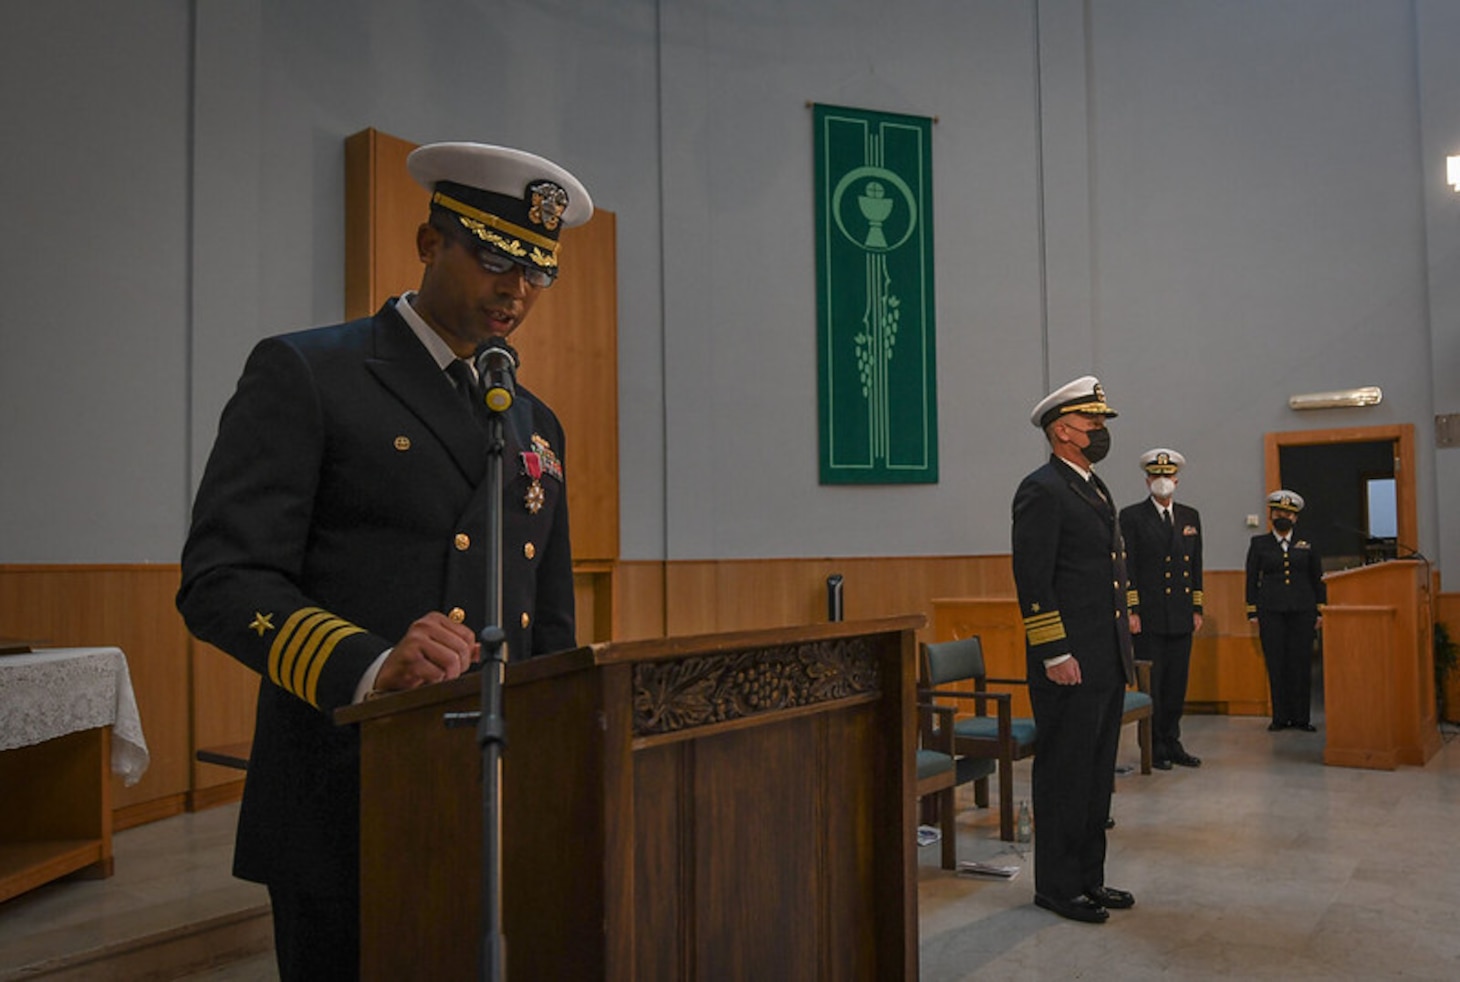 Capt. Kenneth S. Pickard, right, relieves Capt. Frank E. Okata, left, as Commodore, Commander, Task Force 63, during a change of command ceremony held at Naval Support Activity Naples, Italy, Jan. 21, 2022. U.S. Naval Forces Europe and Africa, headquartered in Naples, Italy, conducts the full spectrum of joint and naval operations, often in concert with allied and interagency partners, in order to advance U.S. national interests, security and stability in Europe and Africa.